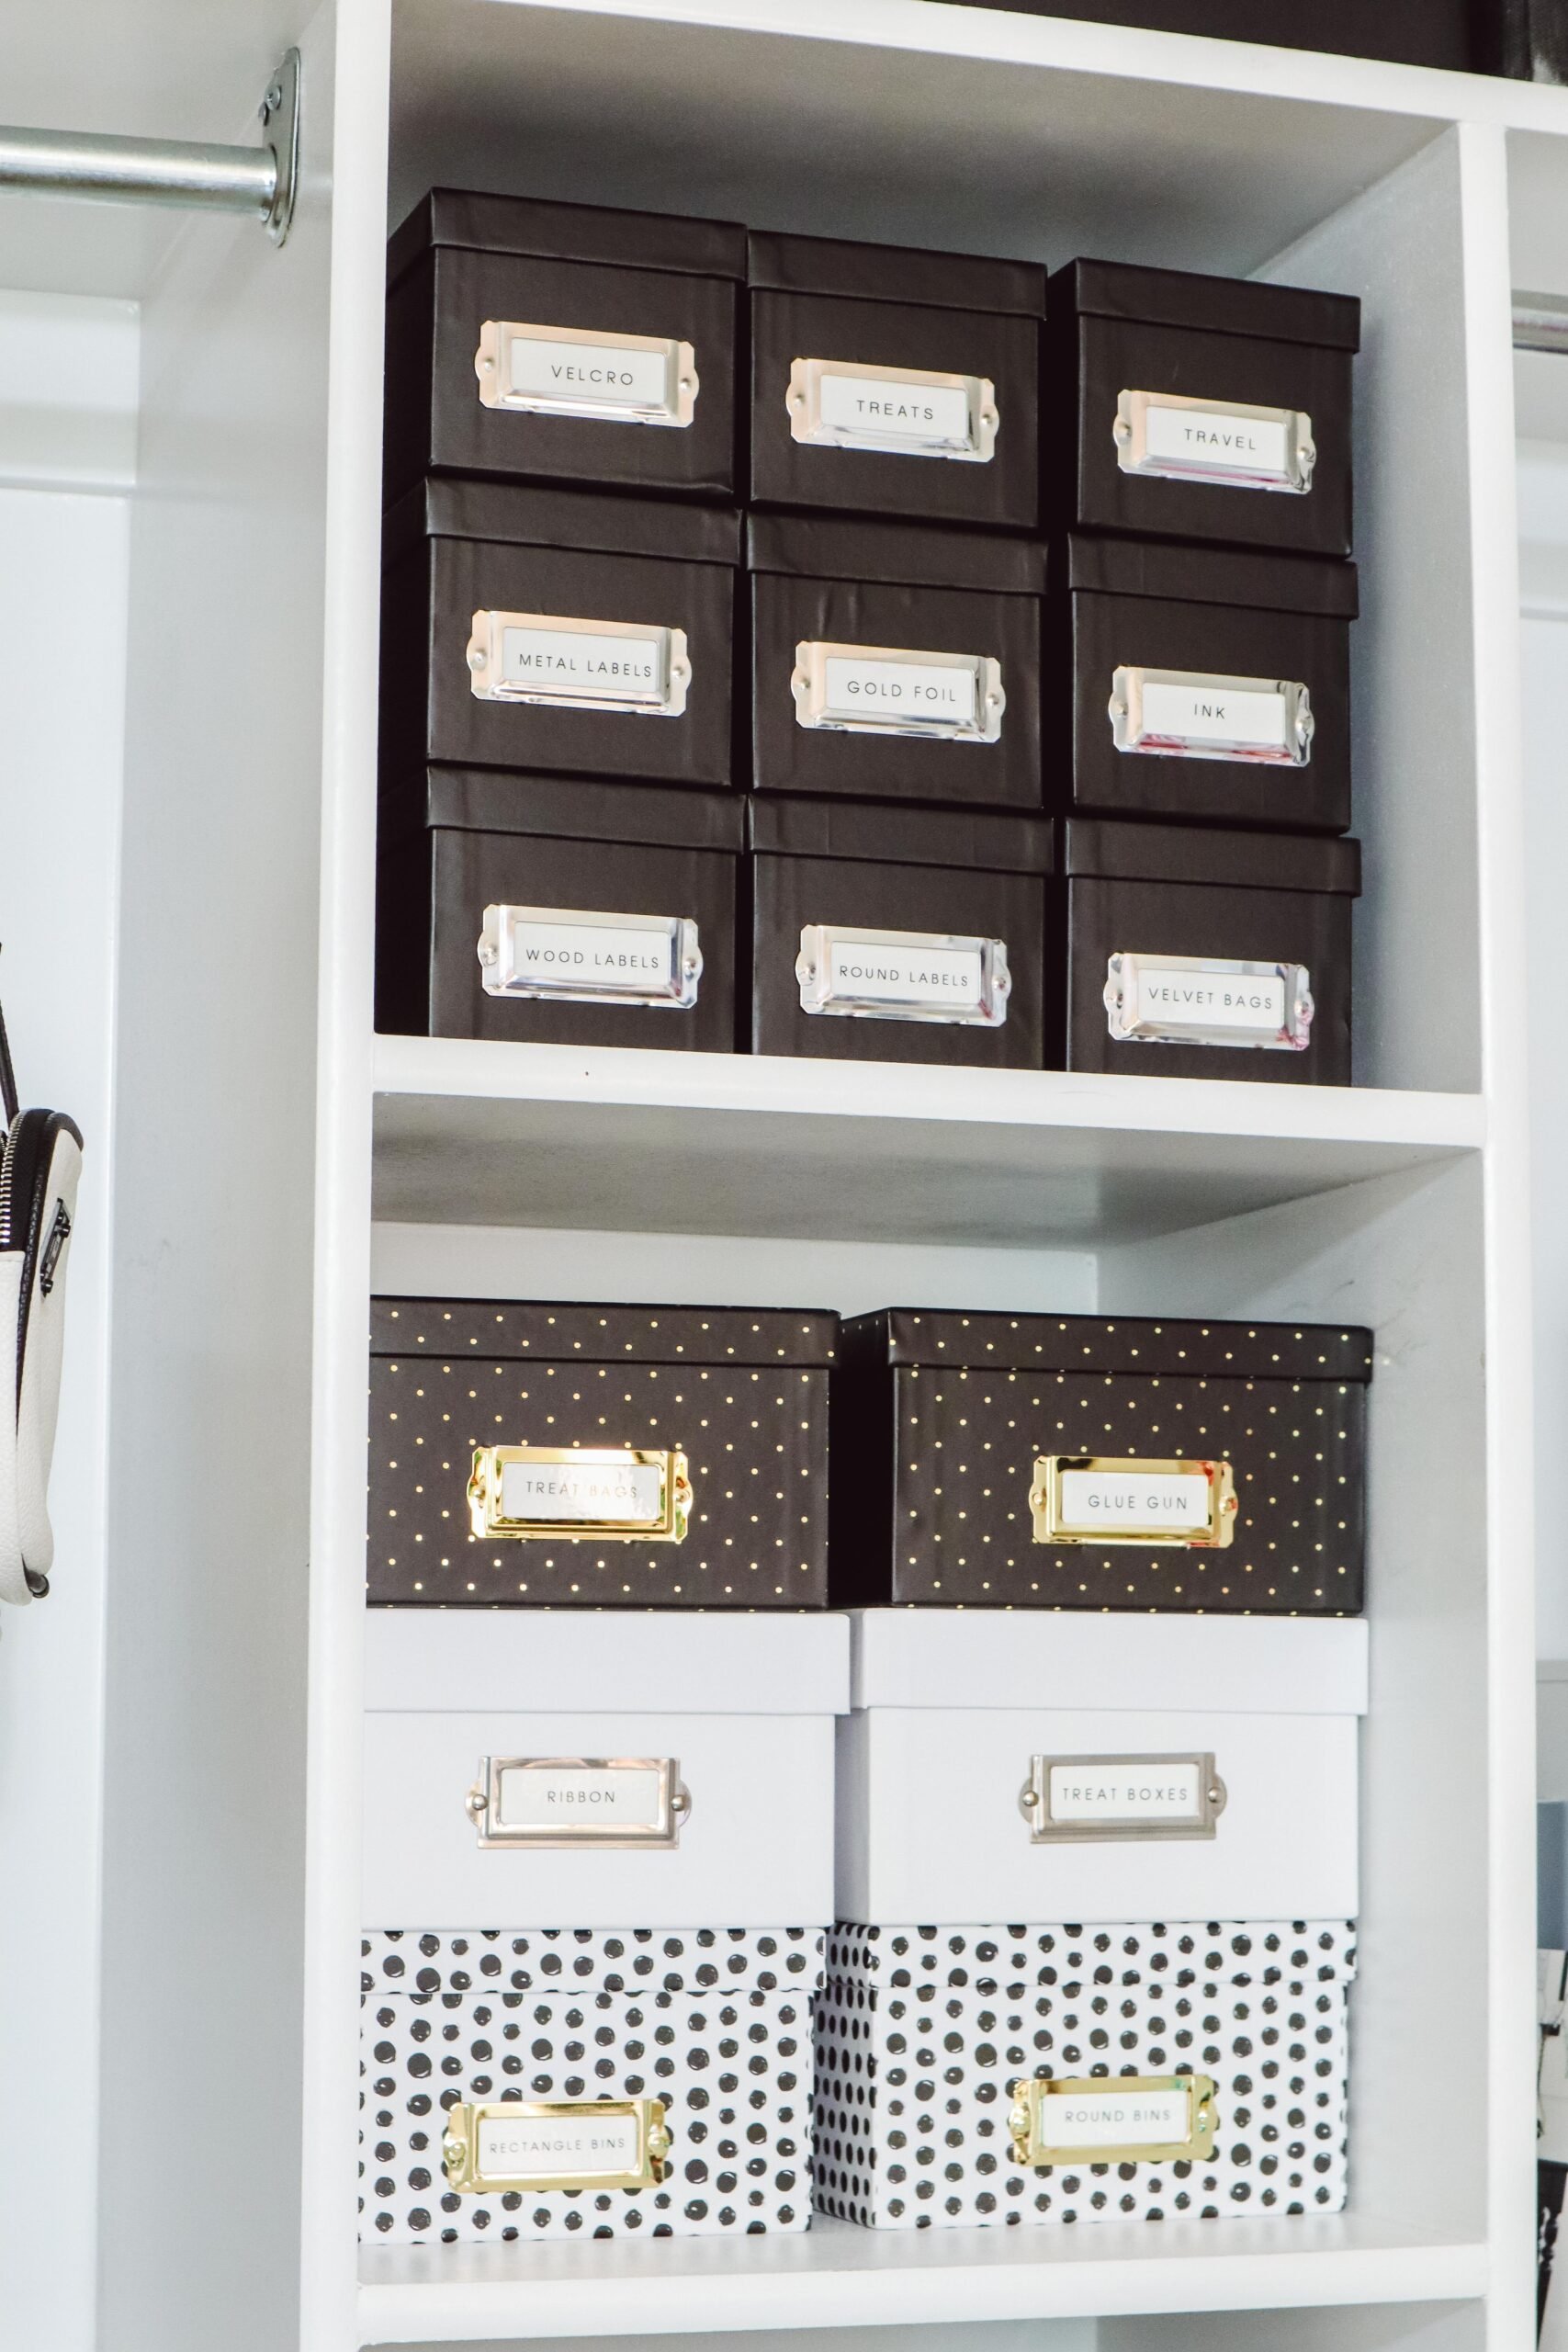 Tips for Your Office Storage Organization